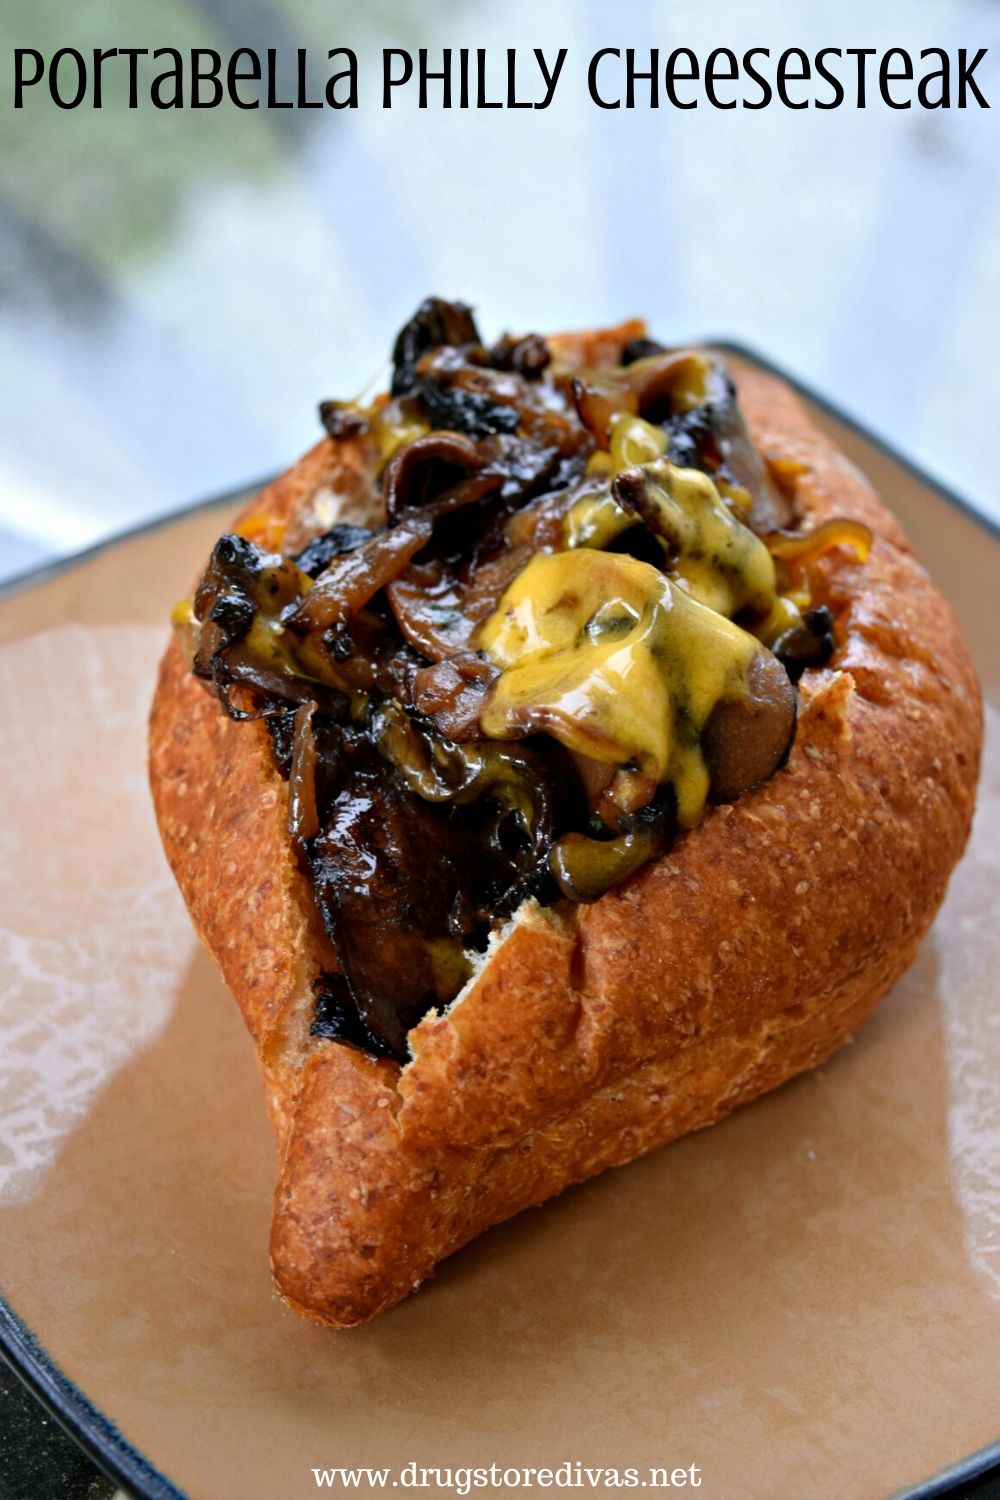 A roll stuffed with mushrooms and cheese with the words "Portabella Philly Cheesesteak" digitally written on top.